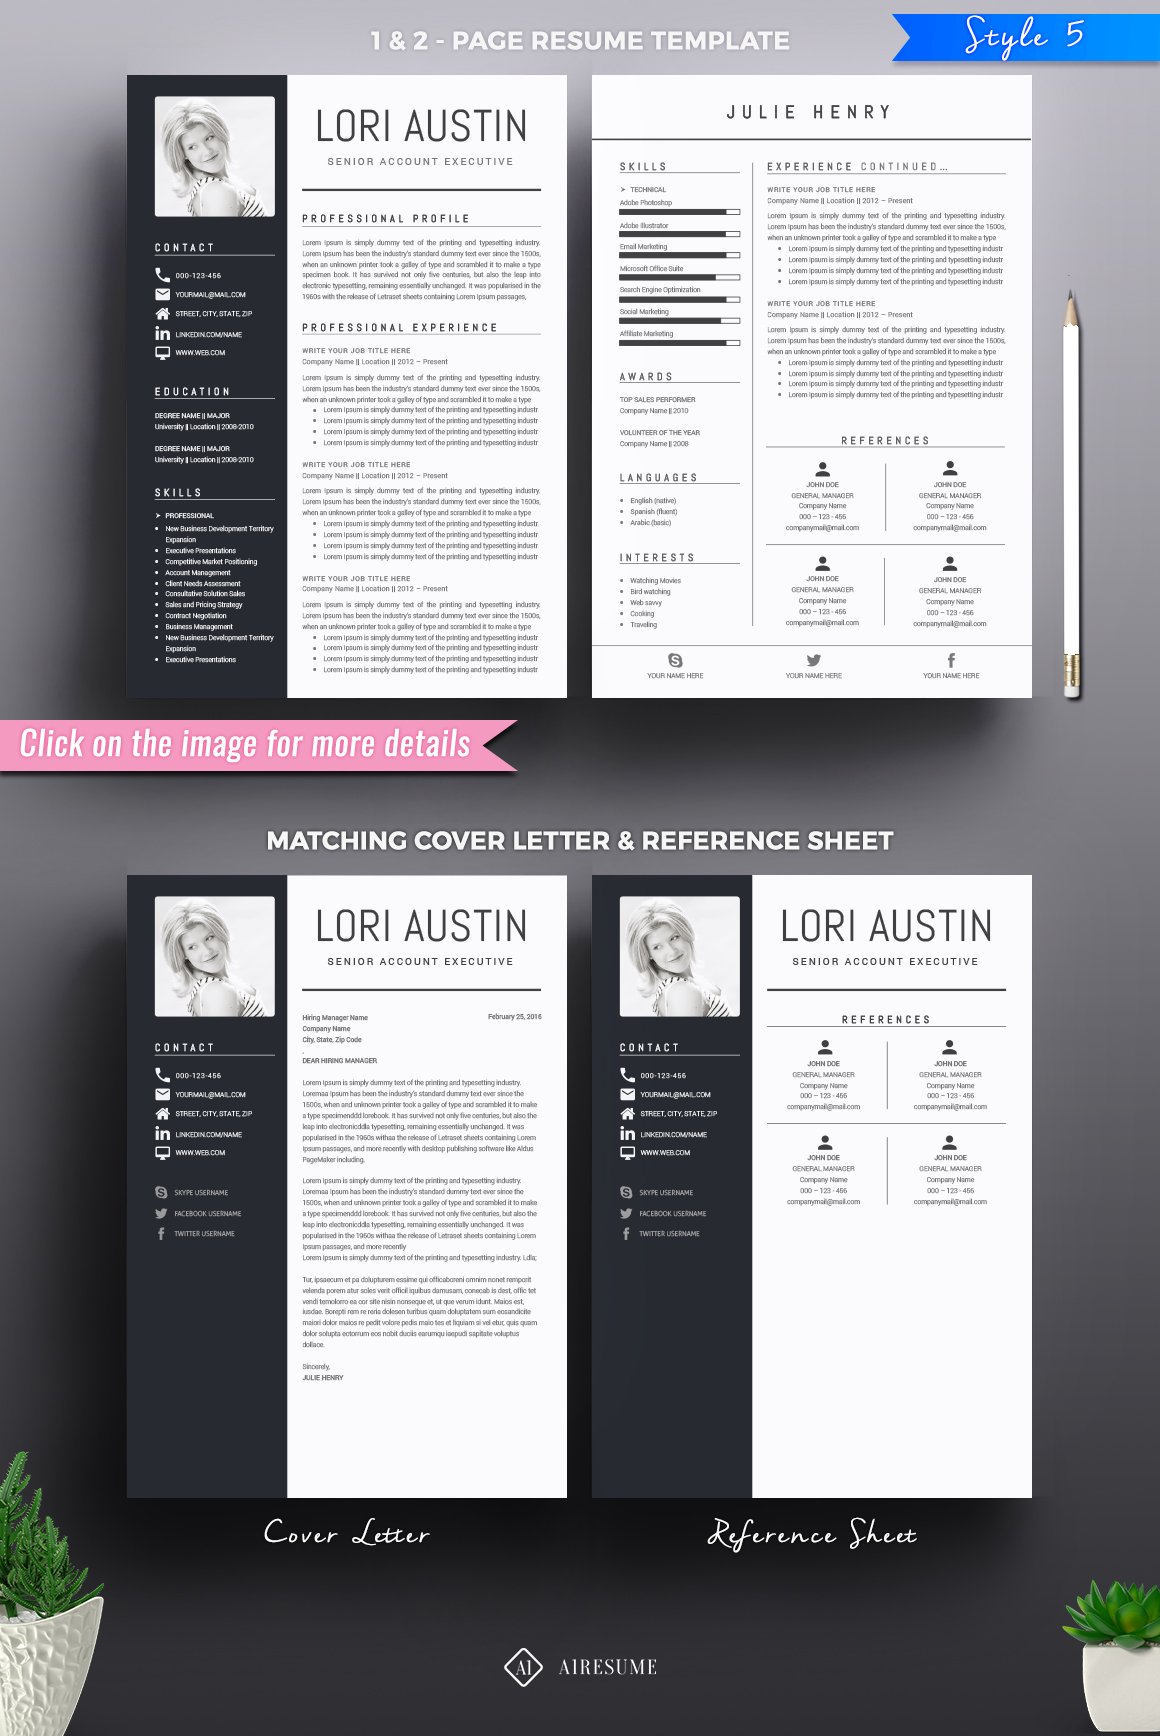 resume template and cover letter 188